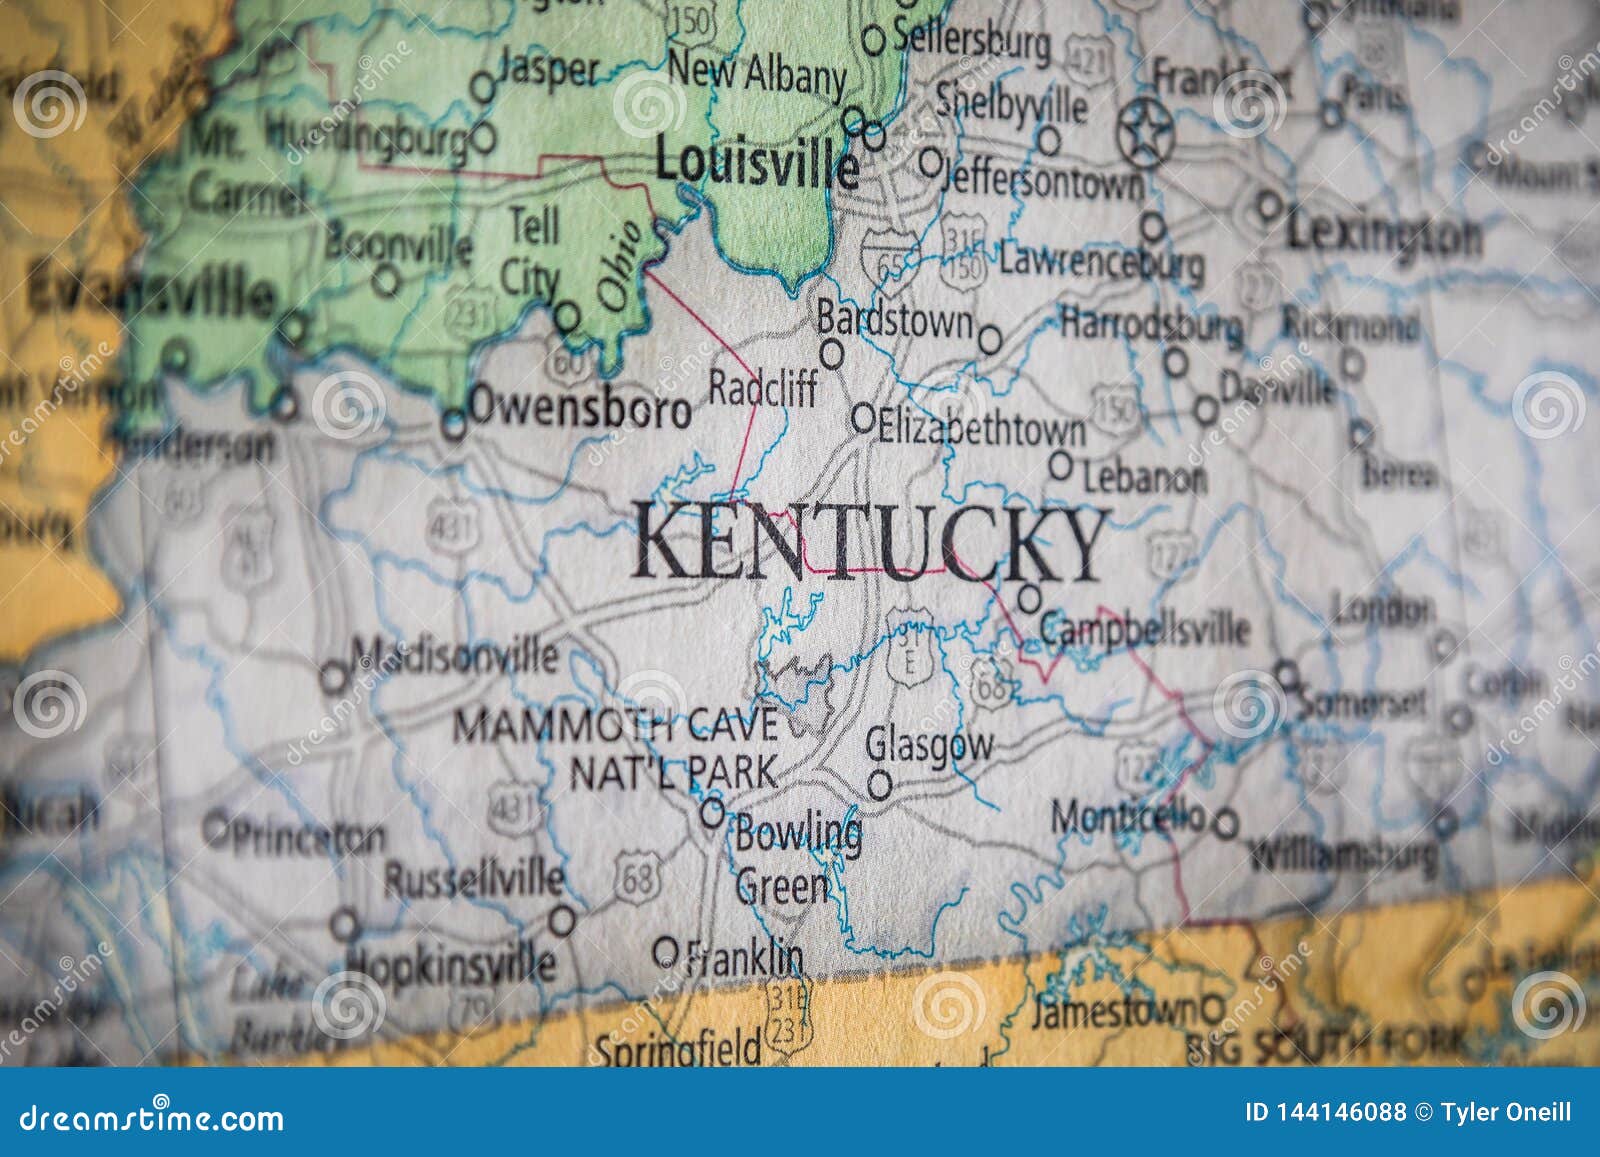 selective focus of kentucky state on a geographical and political state map of the usa